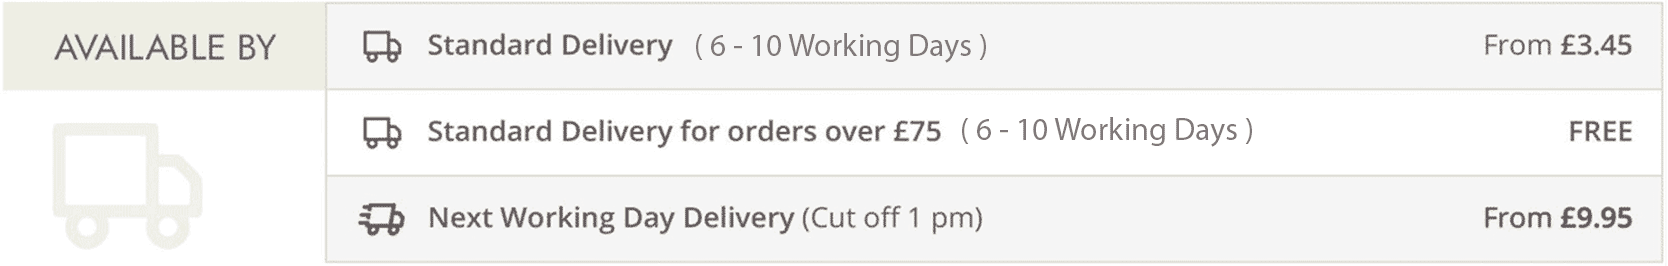 delivery times